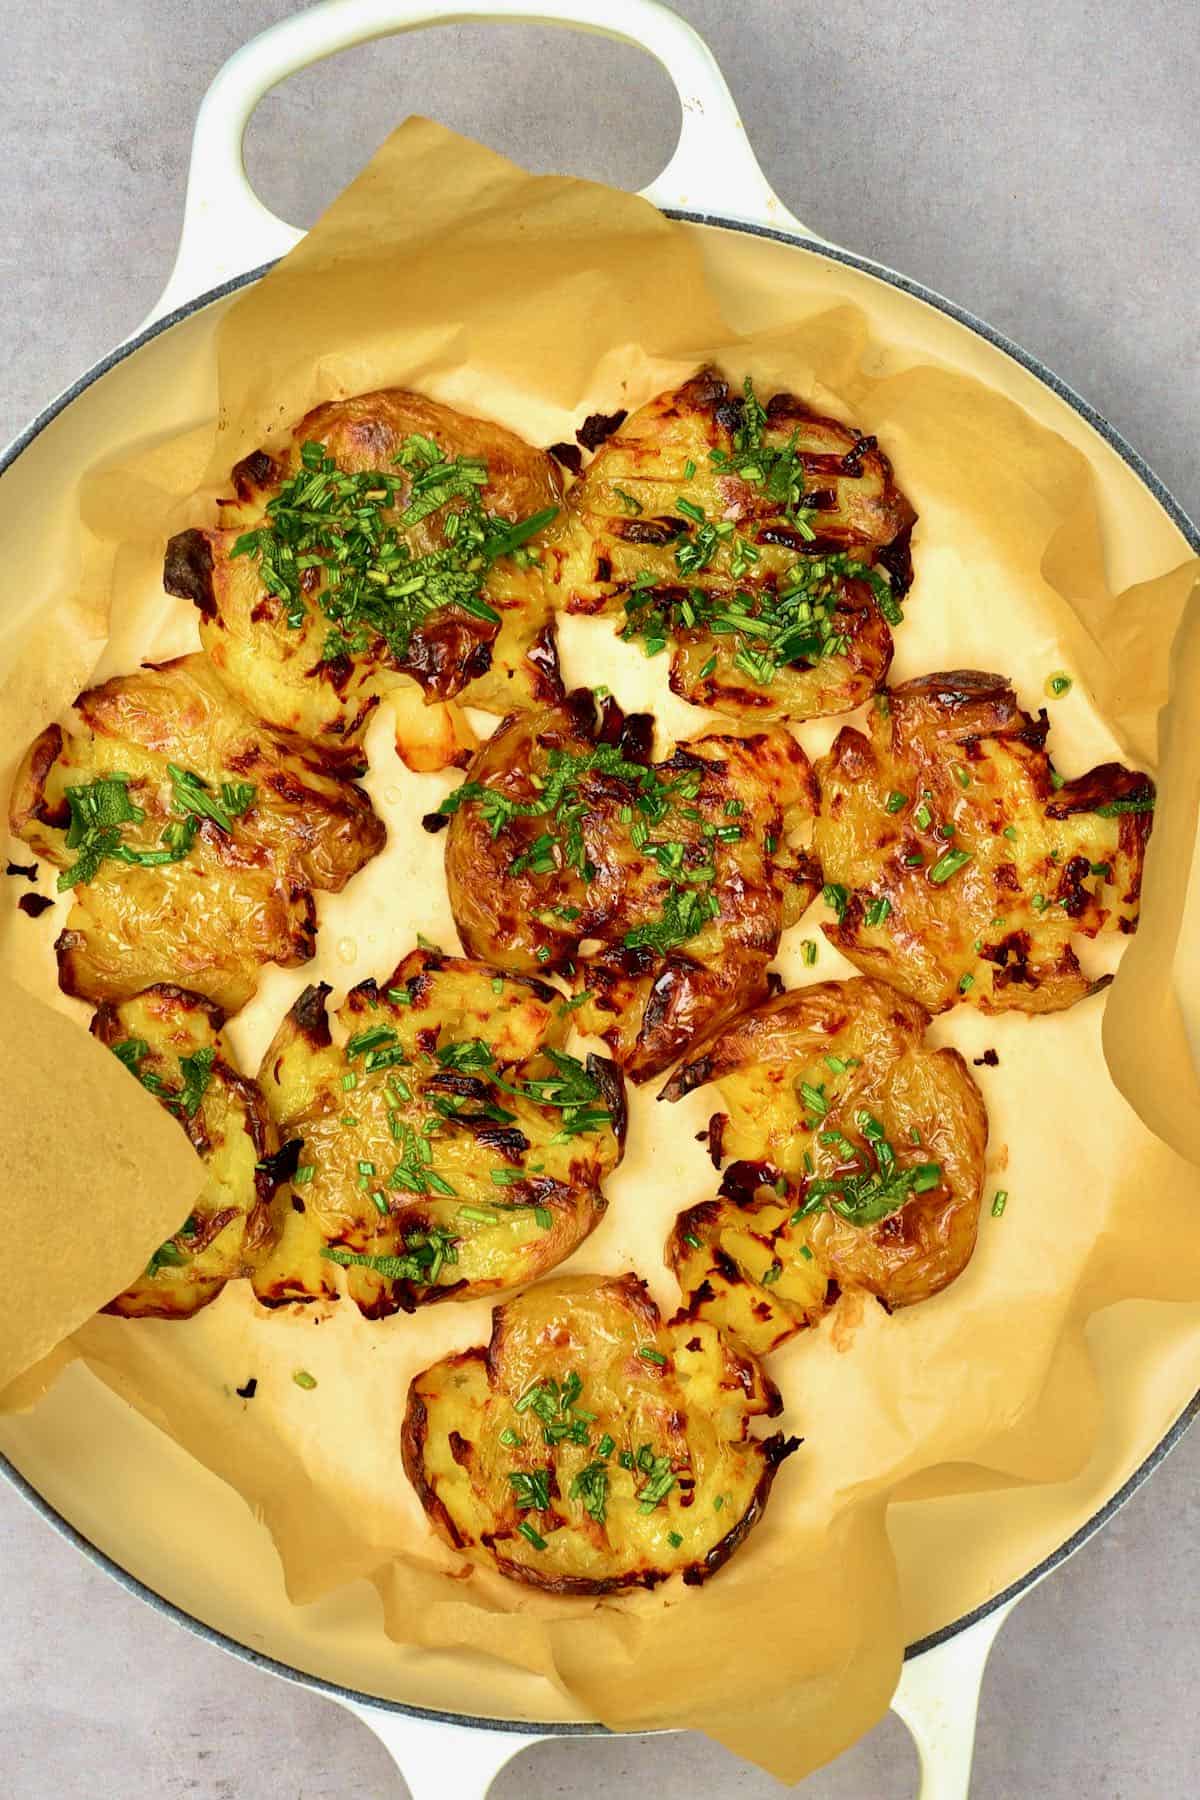 Baked smashed potatoes topped with thyme in an oven dish